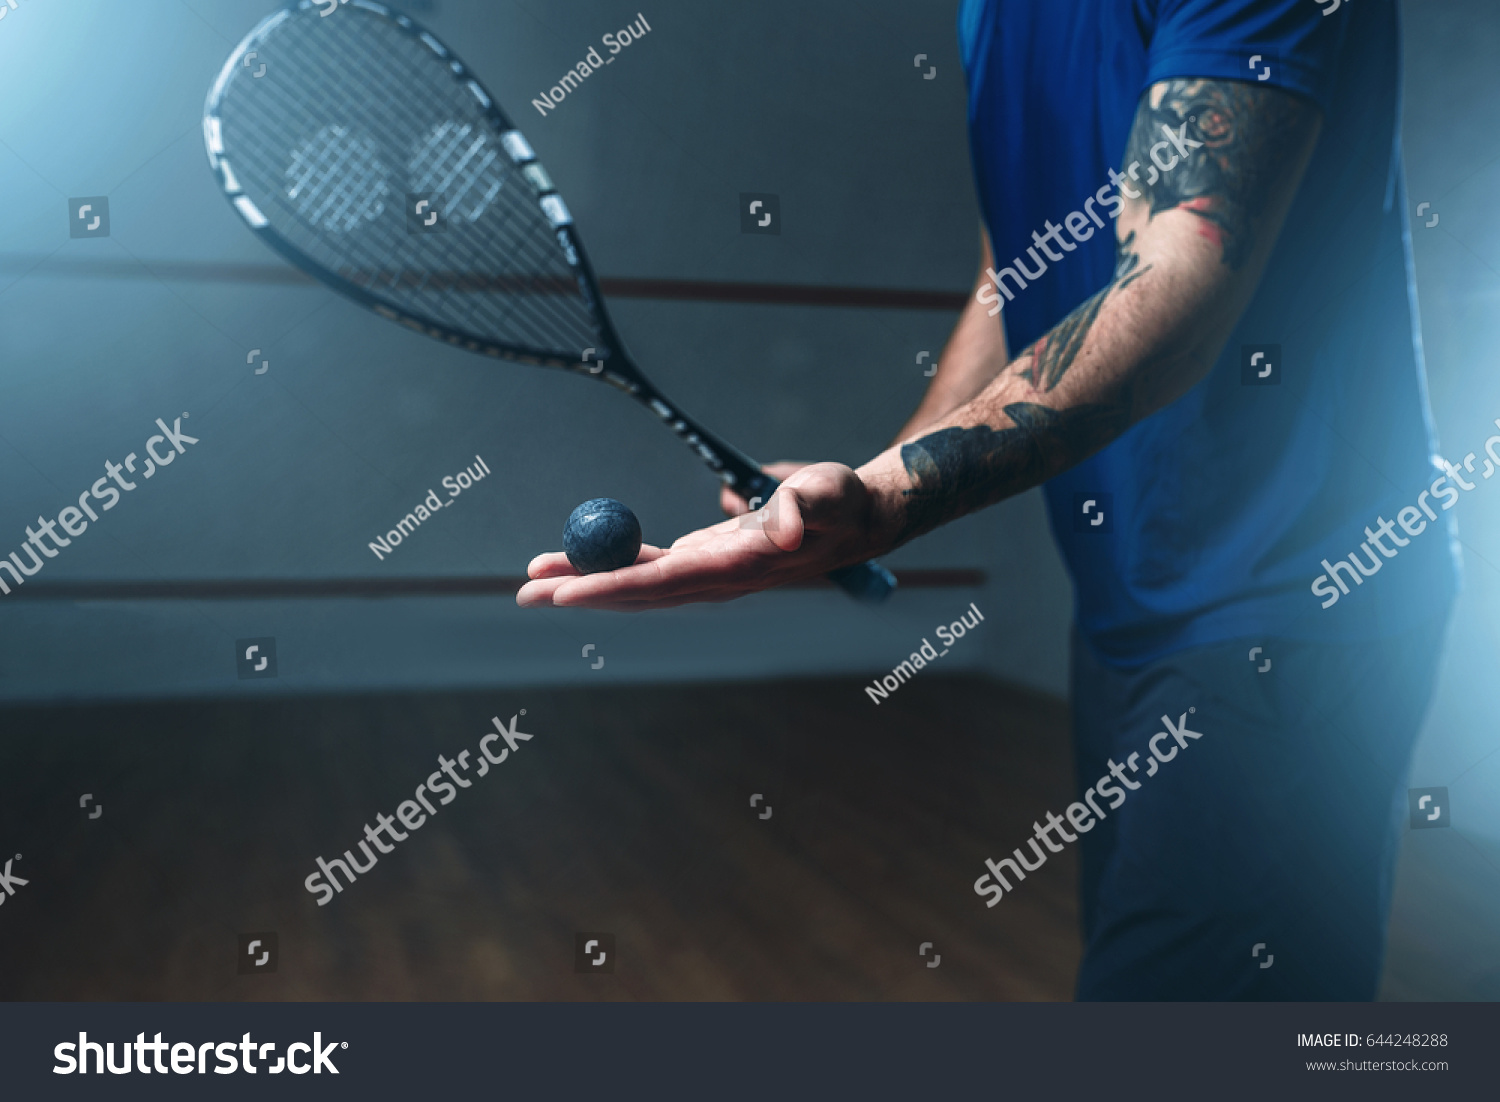 Male squash player training on indoor court #644248288